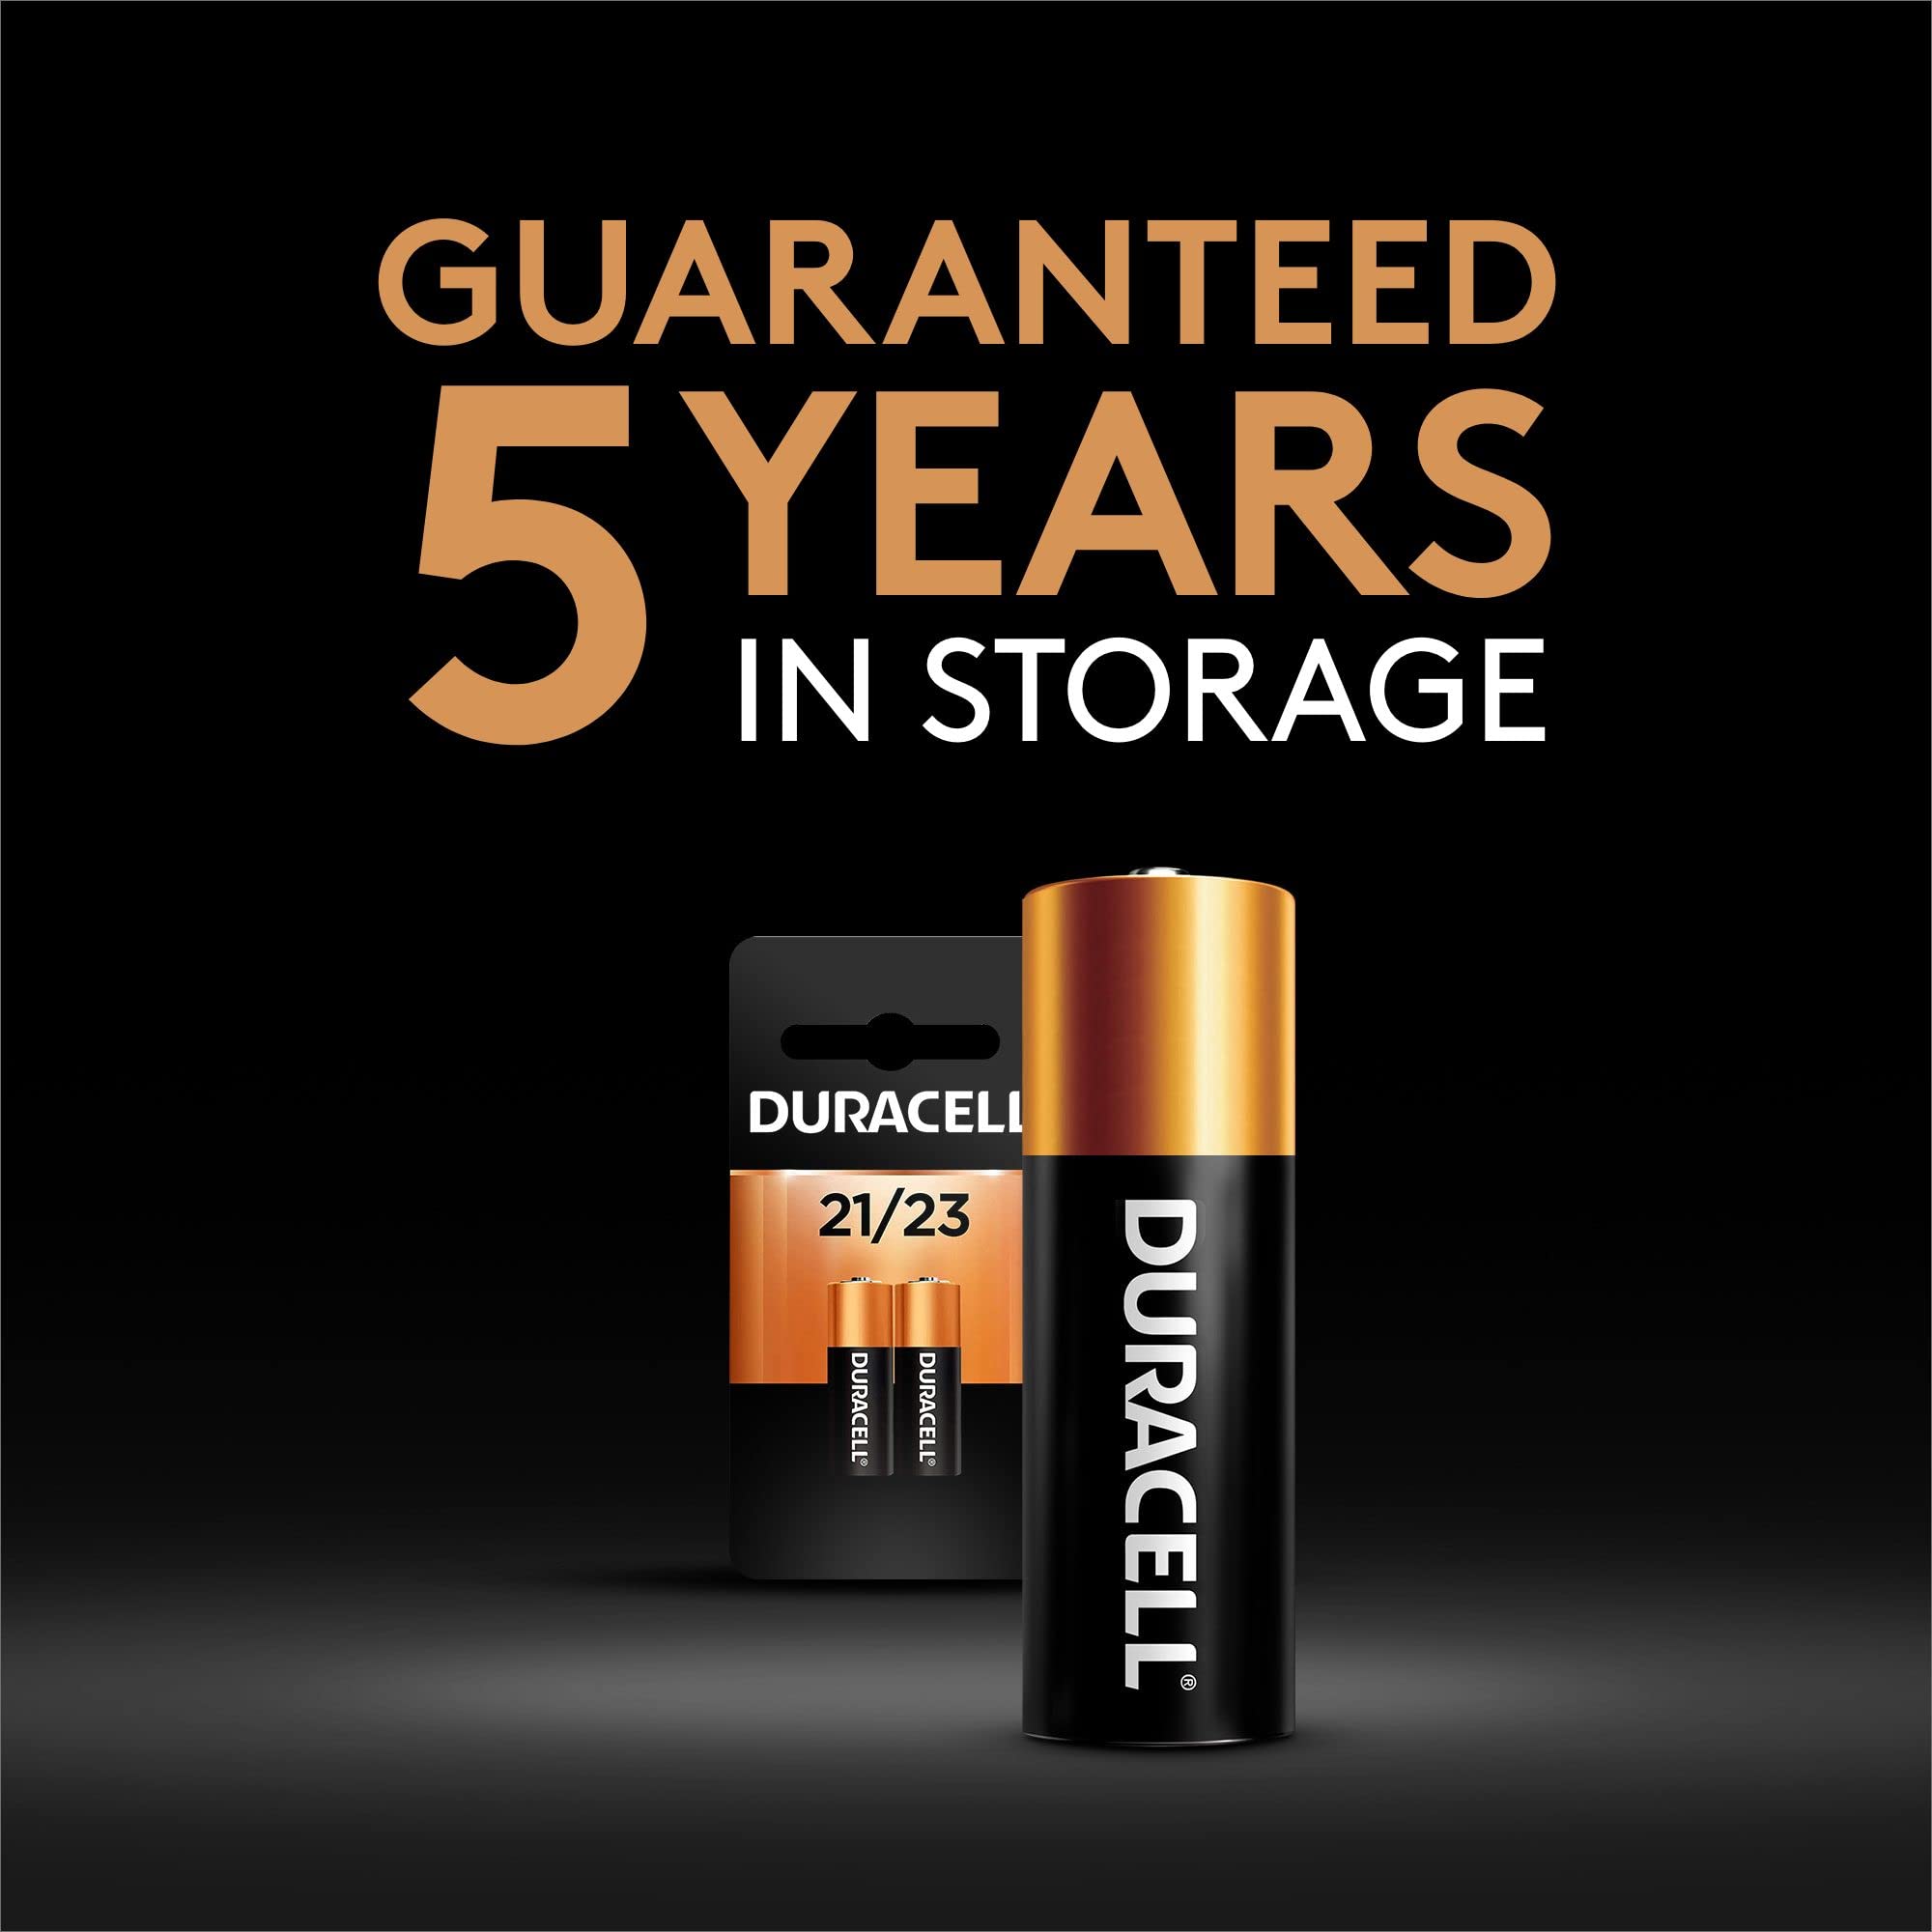 Duracell 21/23 12V Alkaline Battery, 2 Count Pack, 21/23 12 Volt Alkaline Battery, Long-Lasting for Key Fobs, Car Alarms, GPS Trackers, and More